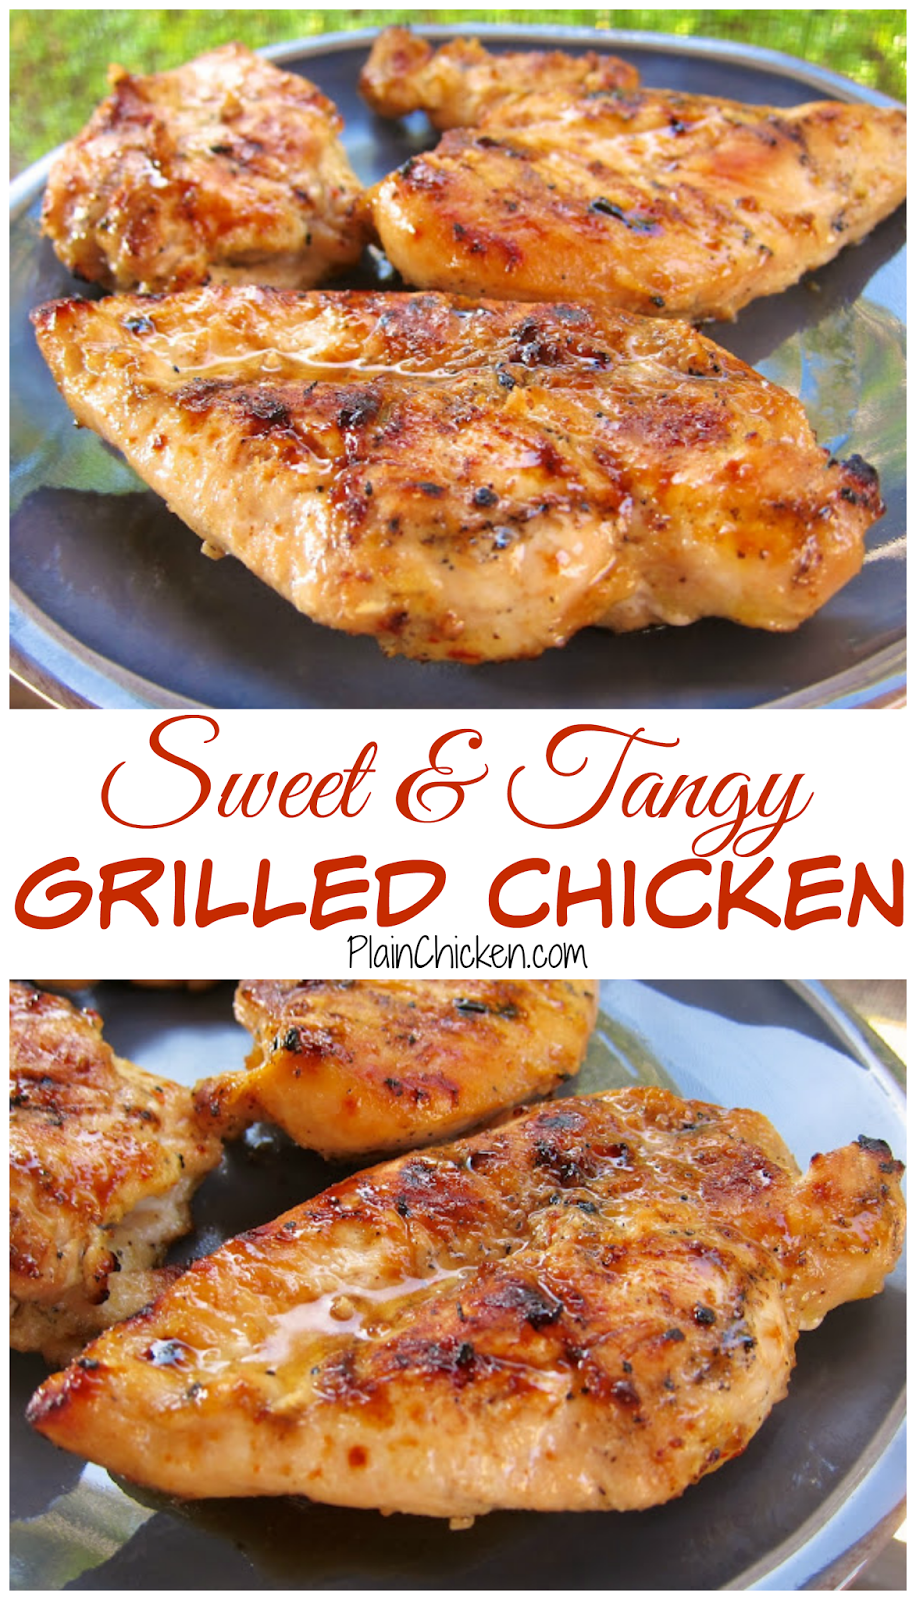 Sweet and Tangy Grilled Chicken Recipe - chicken marinated in cider vinegar, dijon mustard, garlic, lemon, lime and brown sugar. THE BEST! We make this at least twice a month. Great leftover on a salad or in a quesadilla.